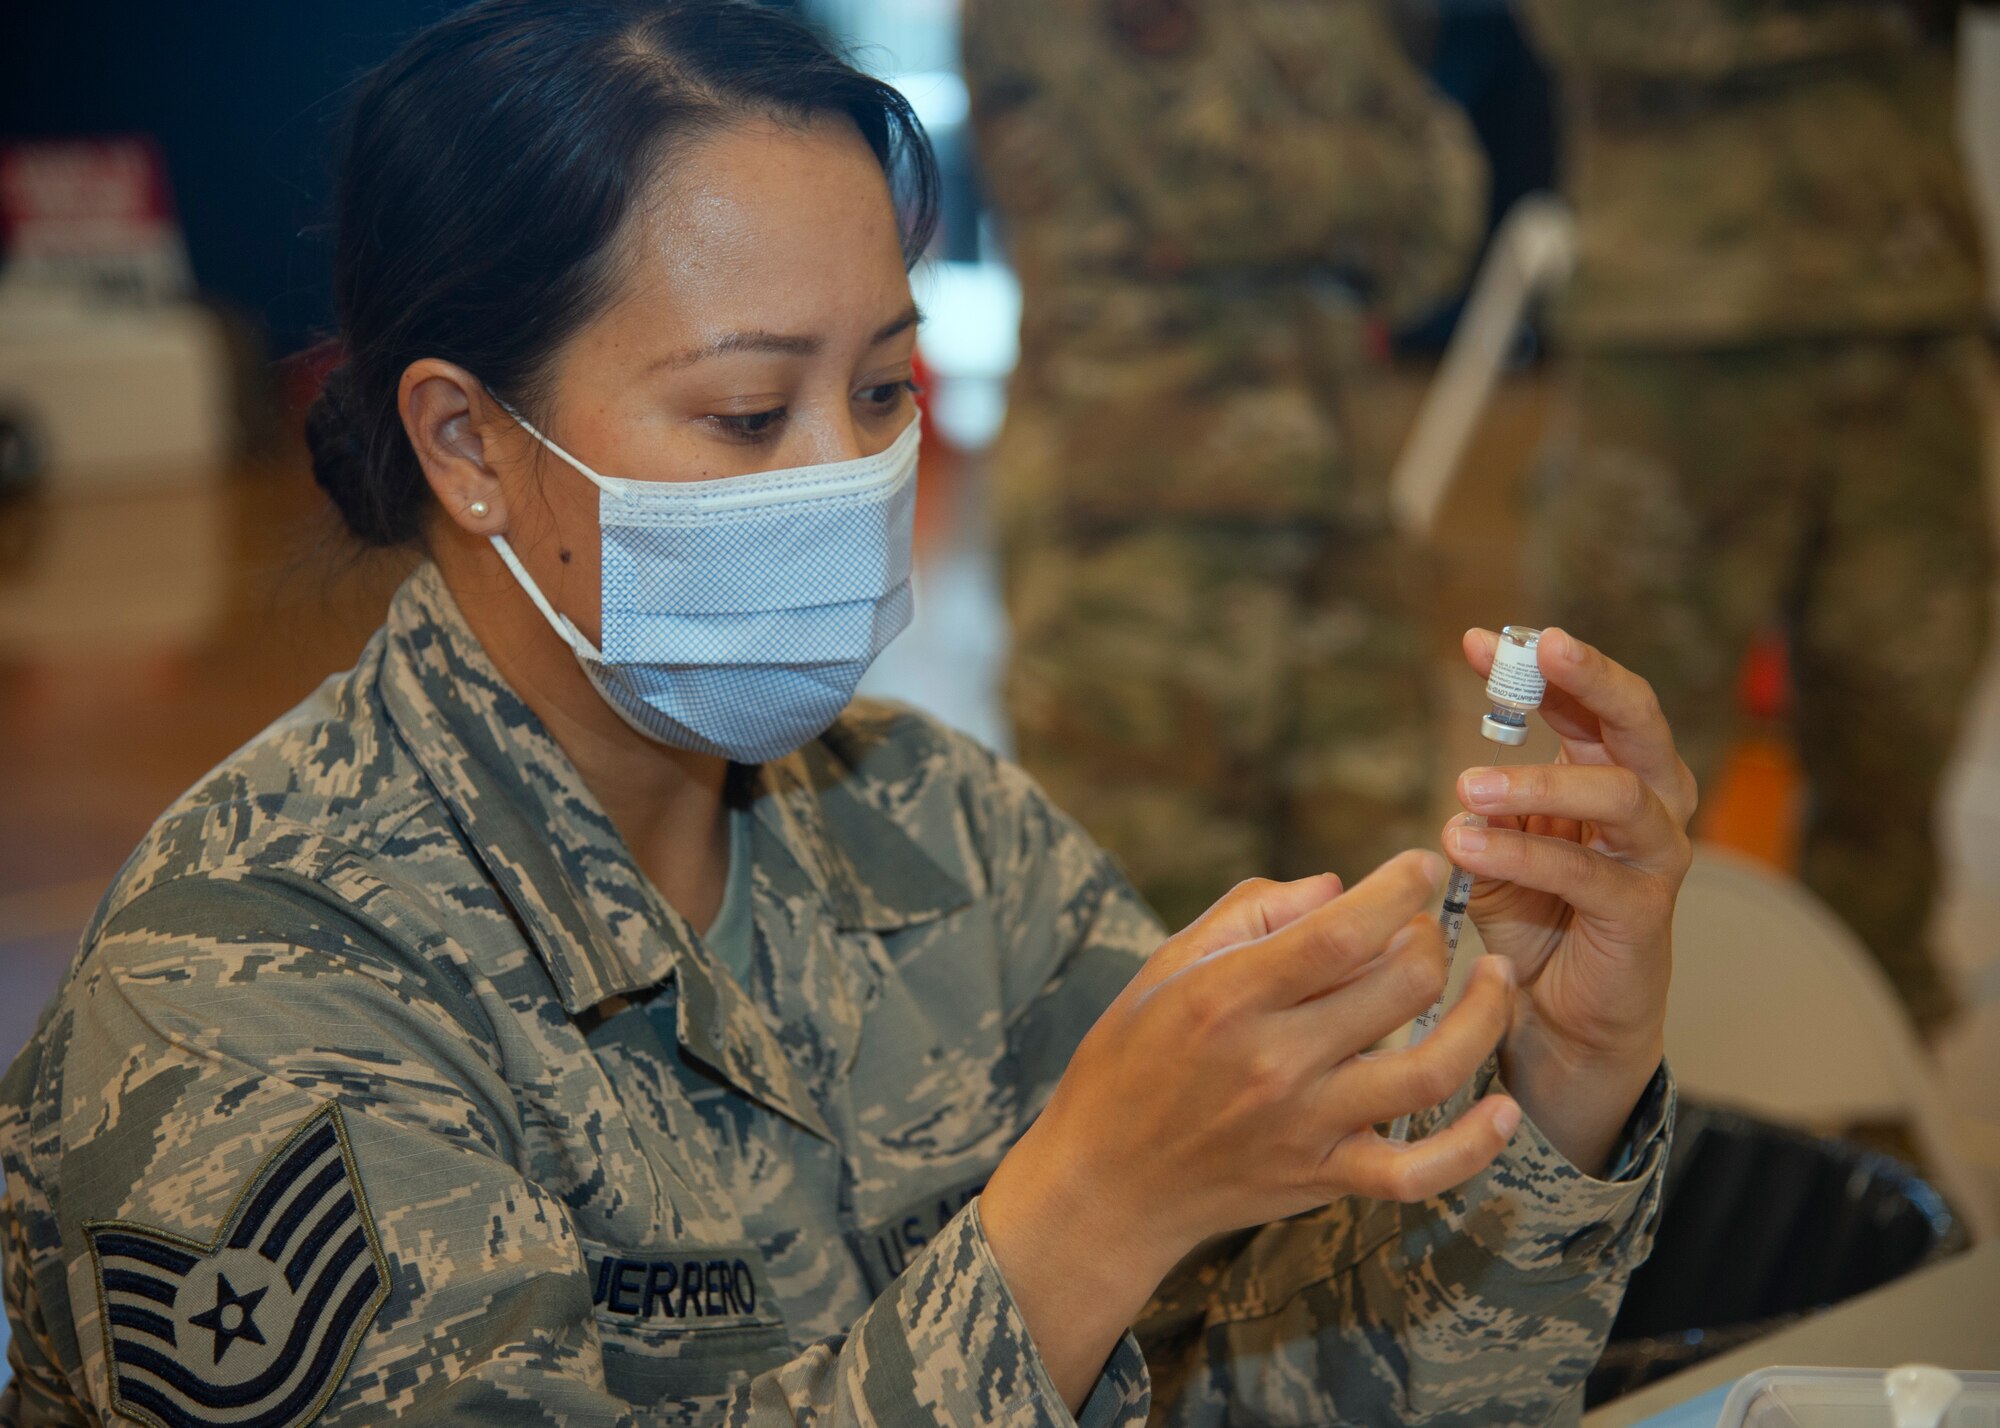 U.S. Air Force Tech. Sgt. Shannon Guerrero, 624th Aeromedical Staging Squadron (ASTS) medical technician, prepares a COVID-19 vaccine needle at a temporary vaccination site at Hickam Memorial Fitness Center on Joint Base Pearl Harbor-Hickam, Hawaii, Jan. 22, 2021.